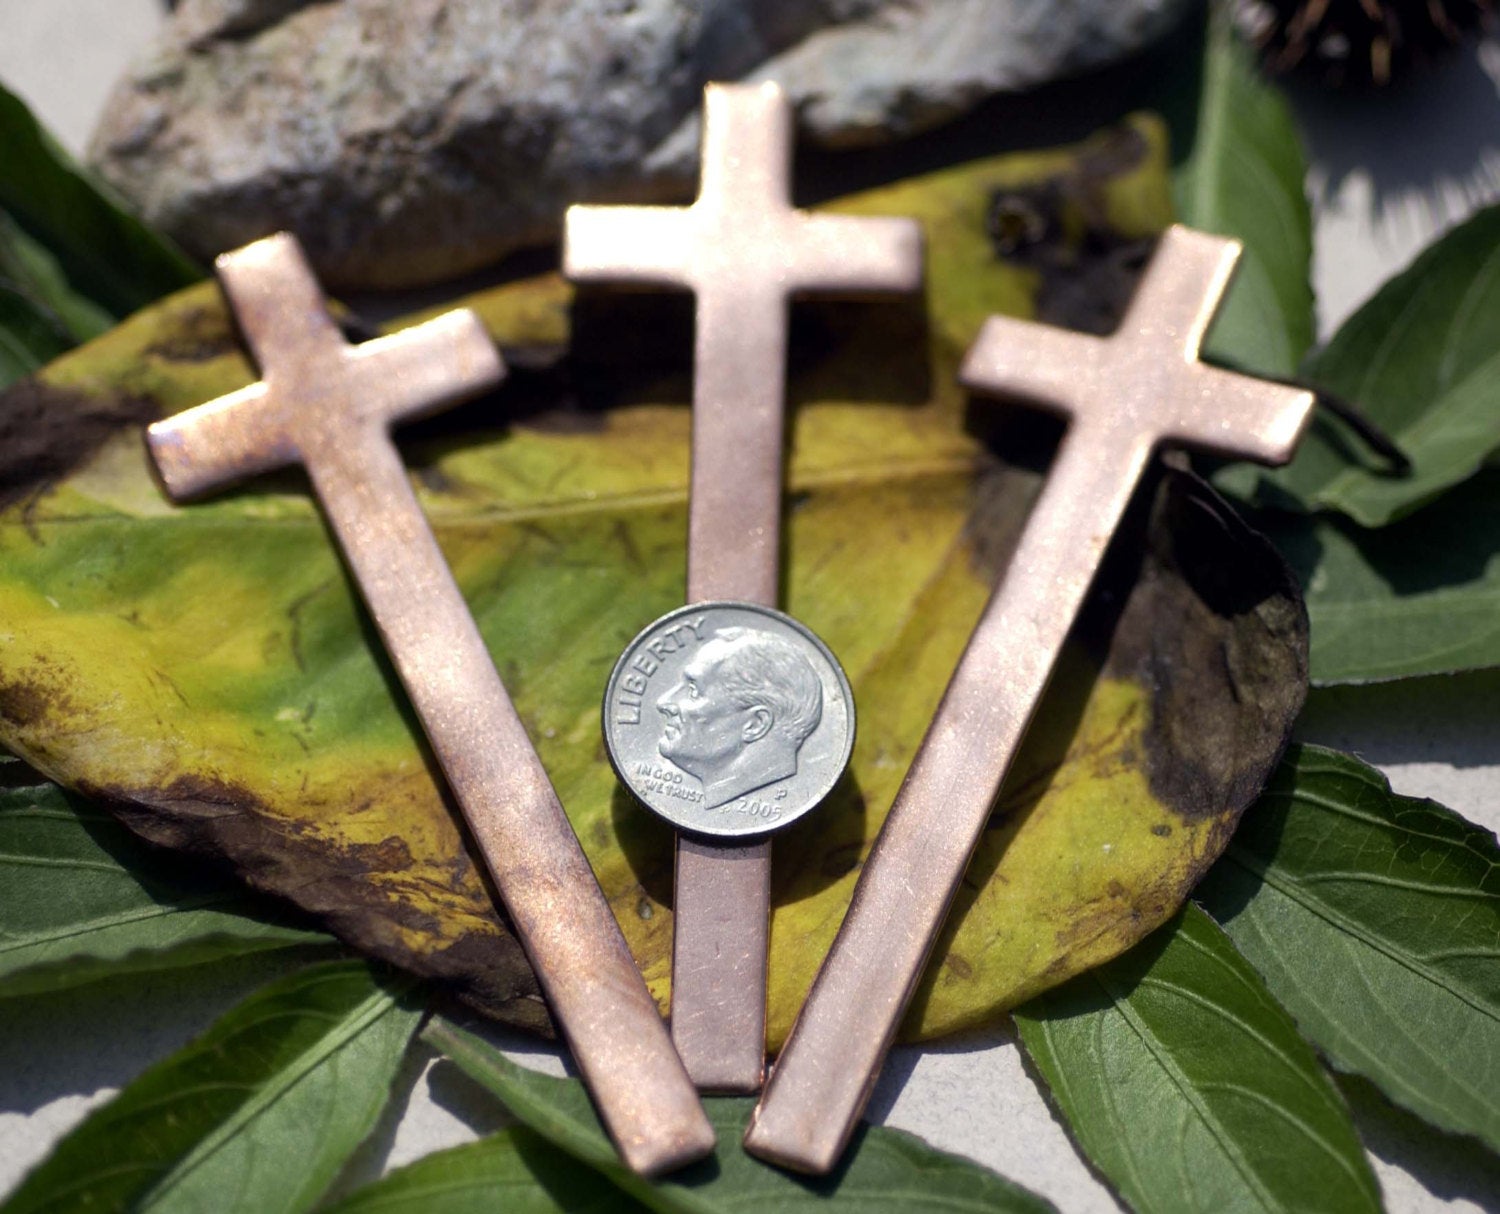 Large Religious Cross shapes 26mm x 77mm metal pendant blanks copper, brass, bronze, nickel silver